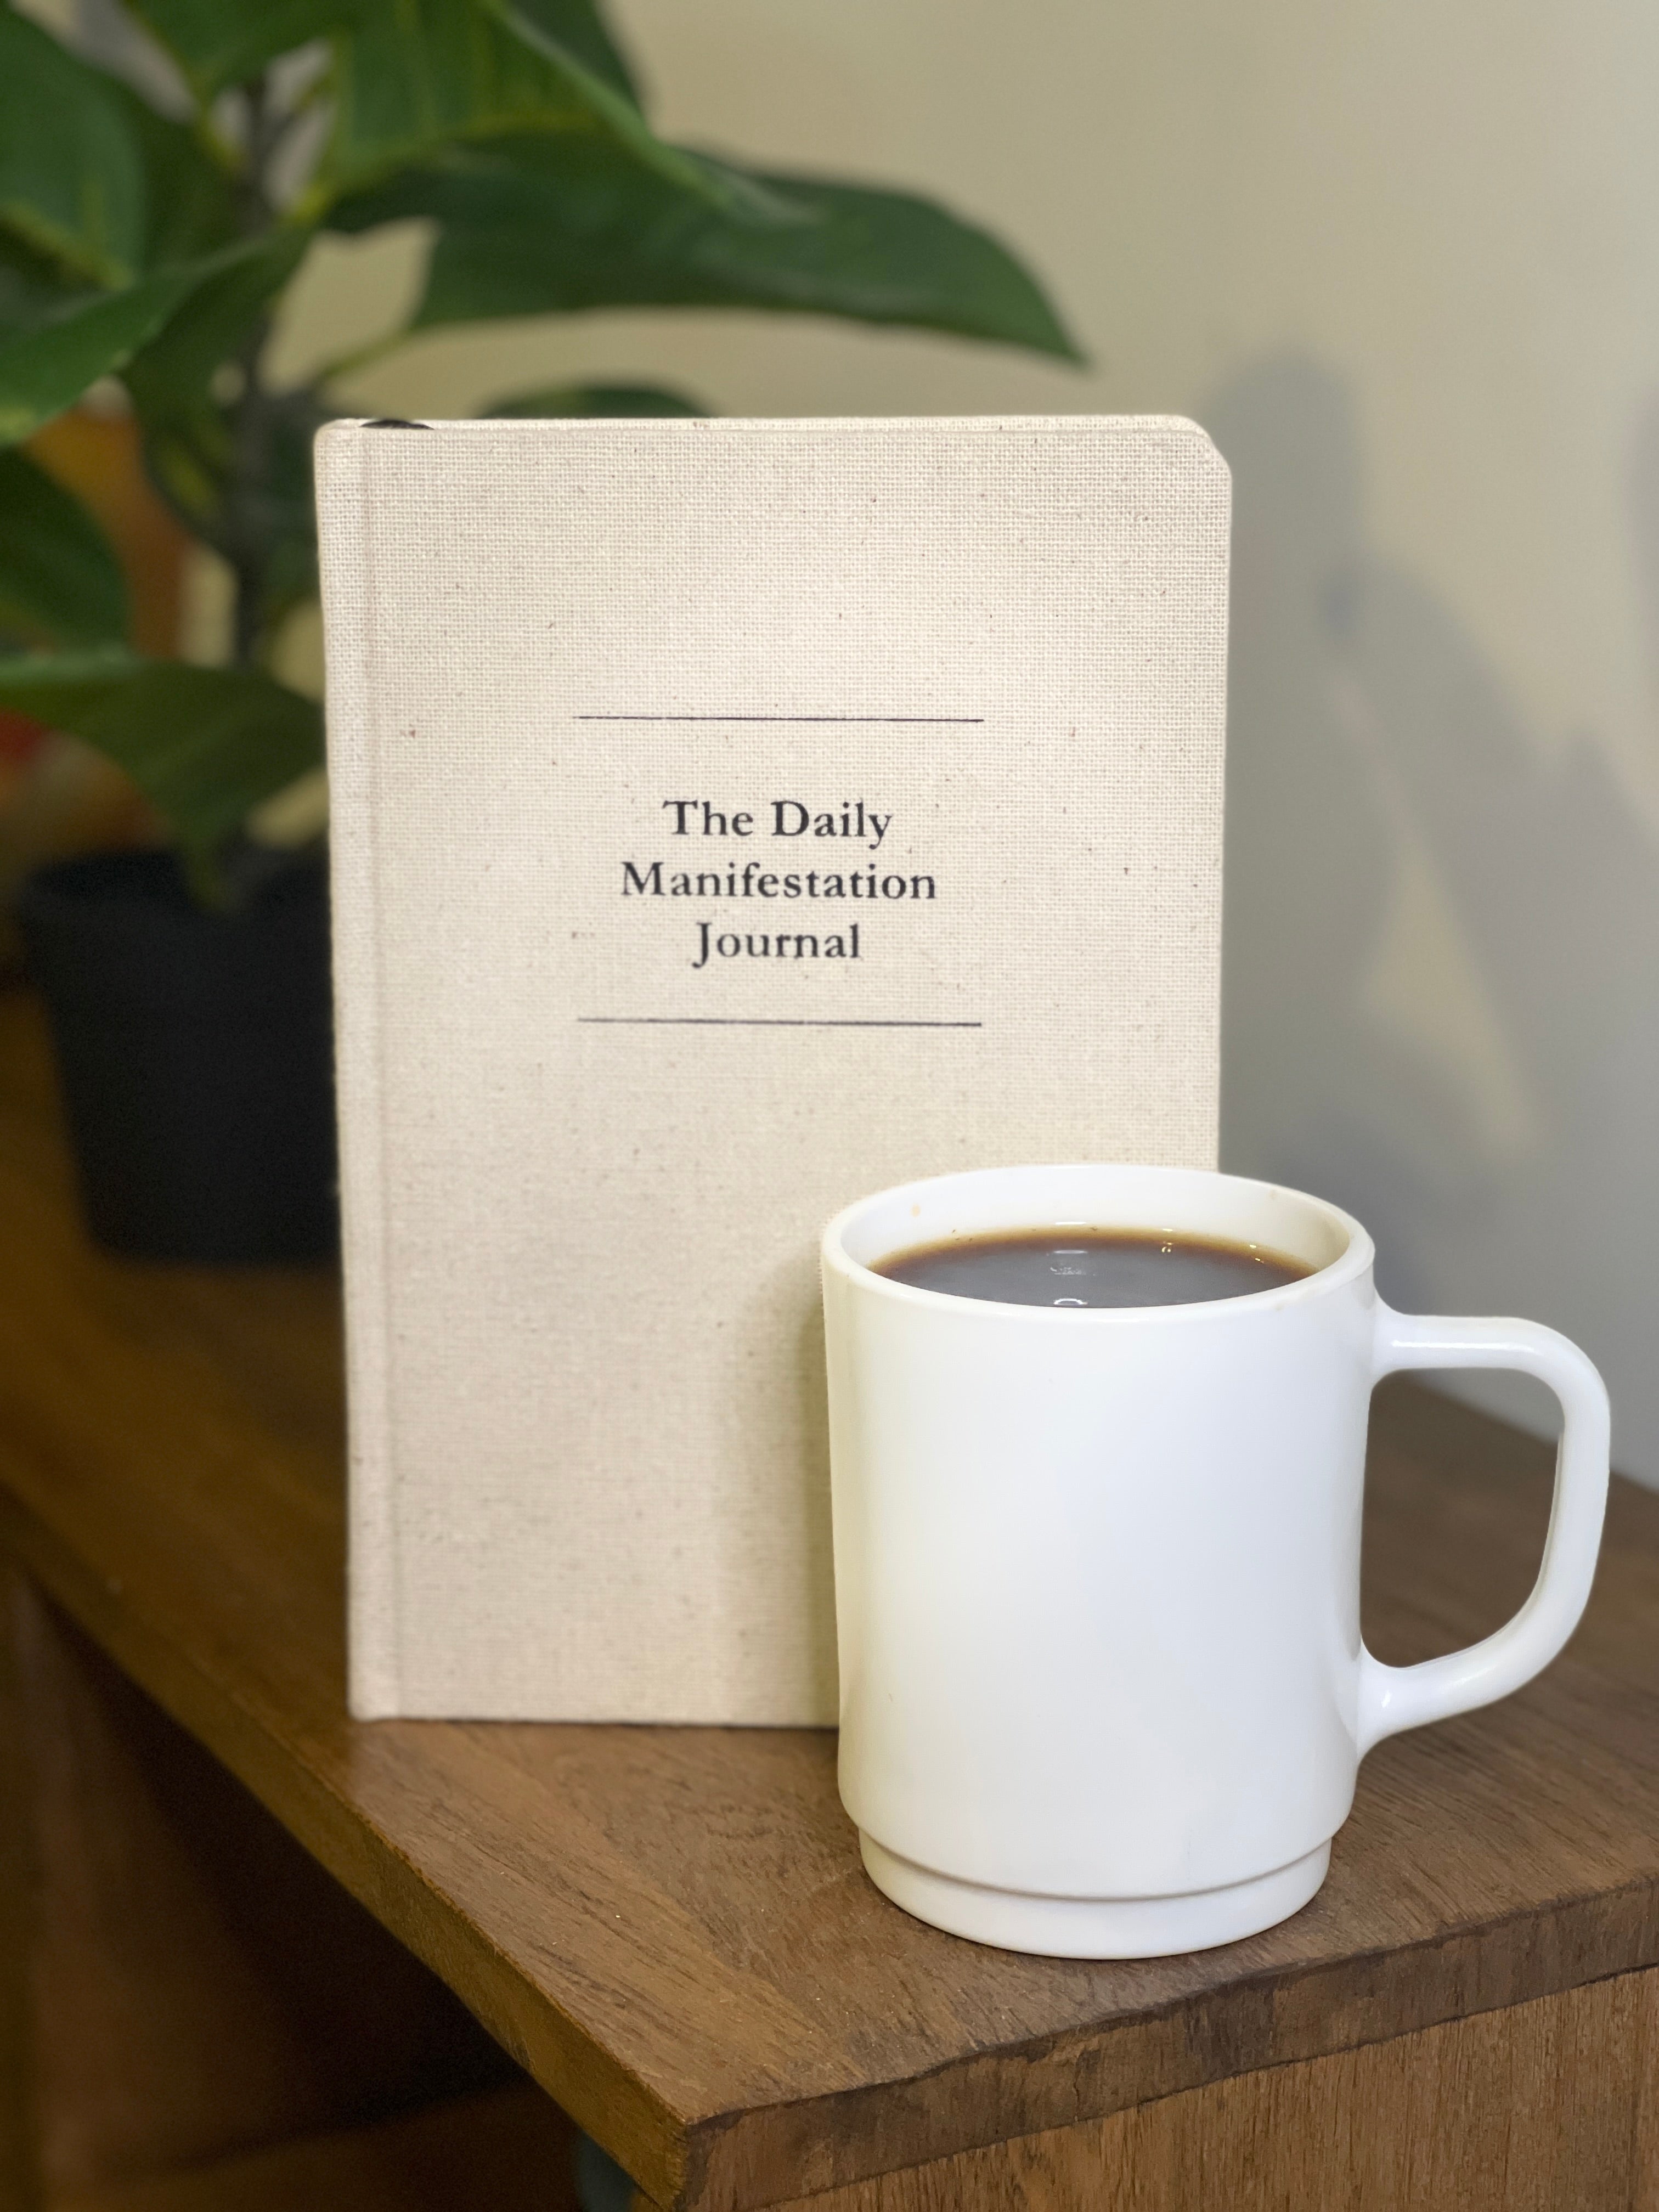 The Daily Manifestation Journal